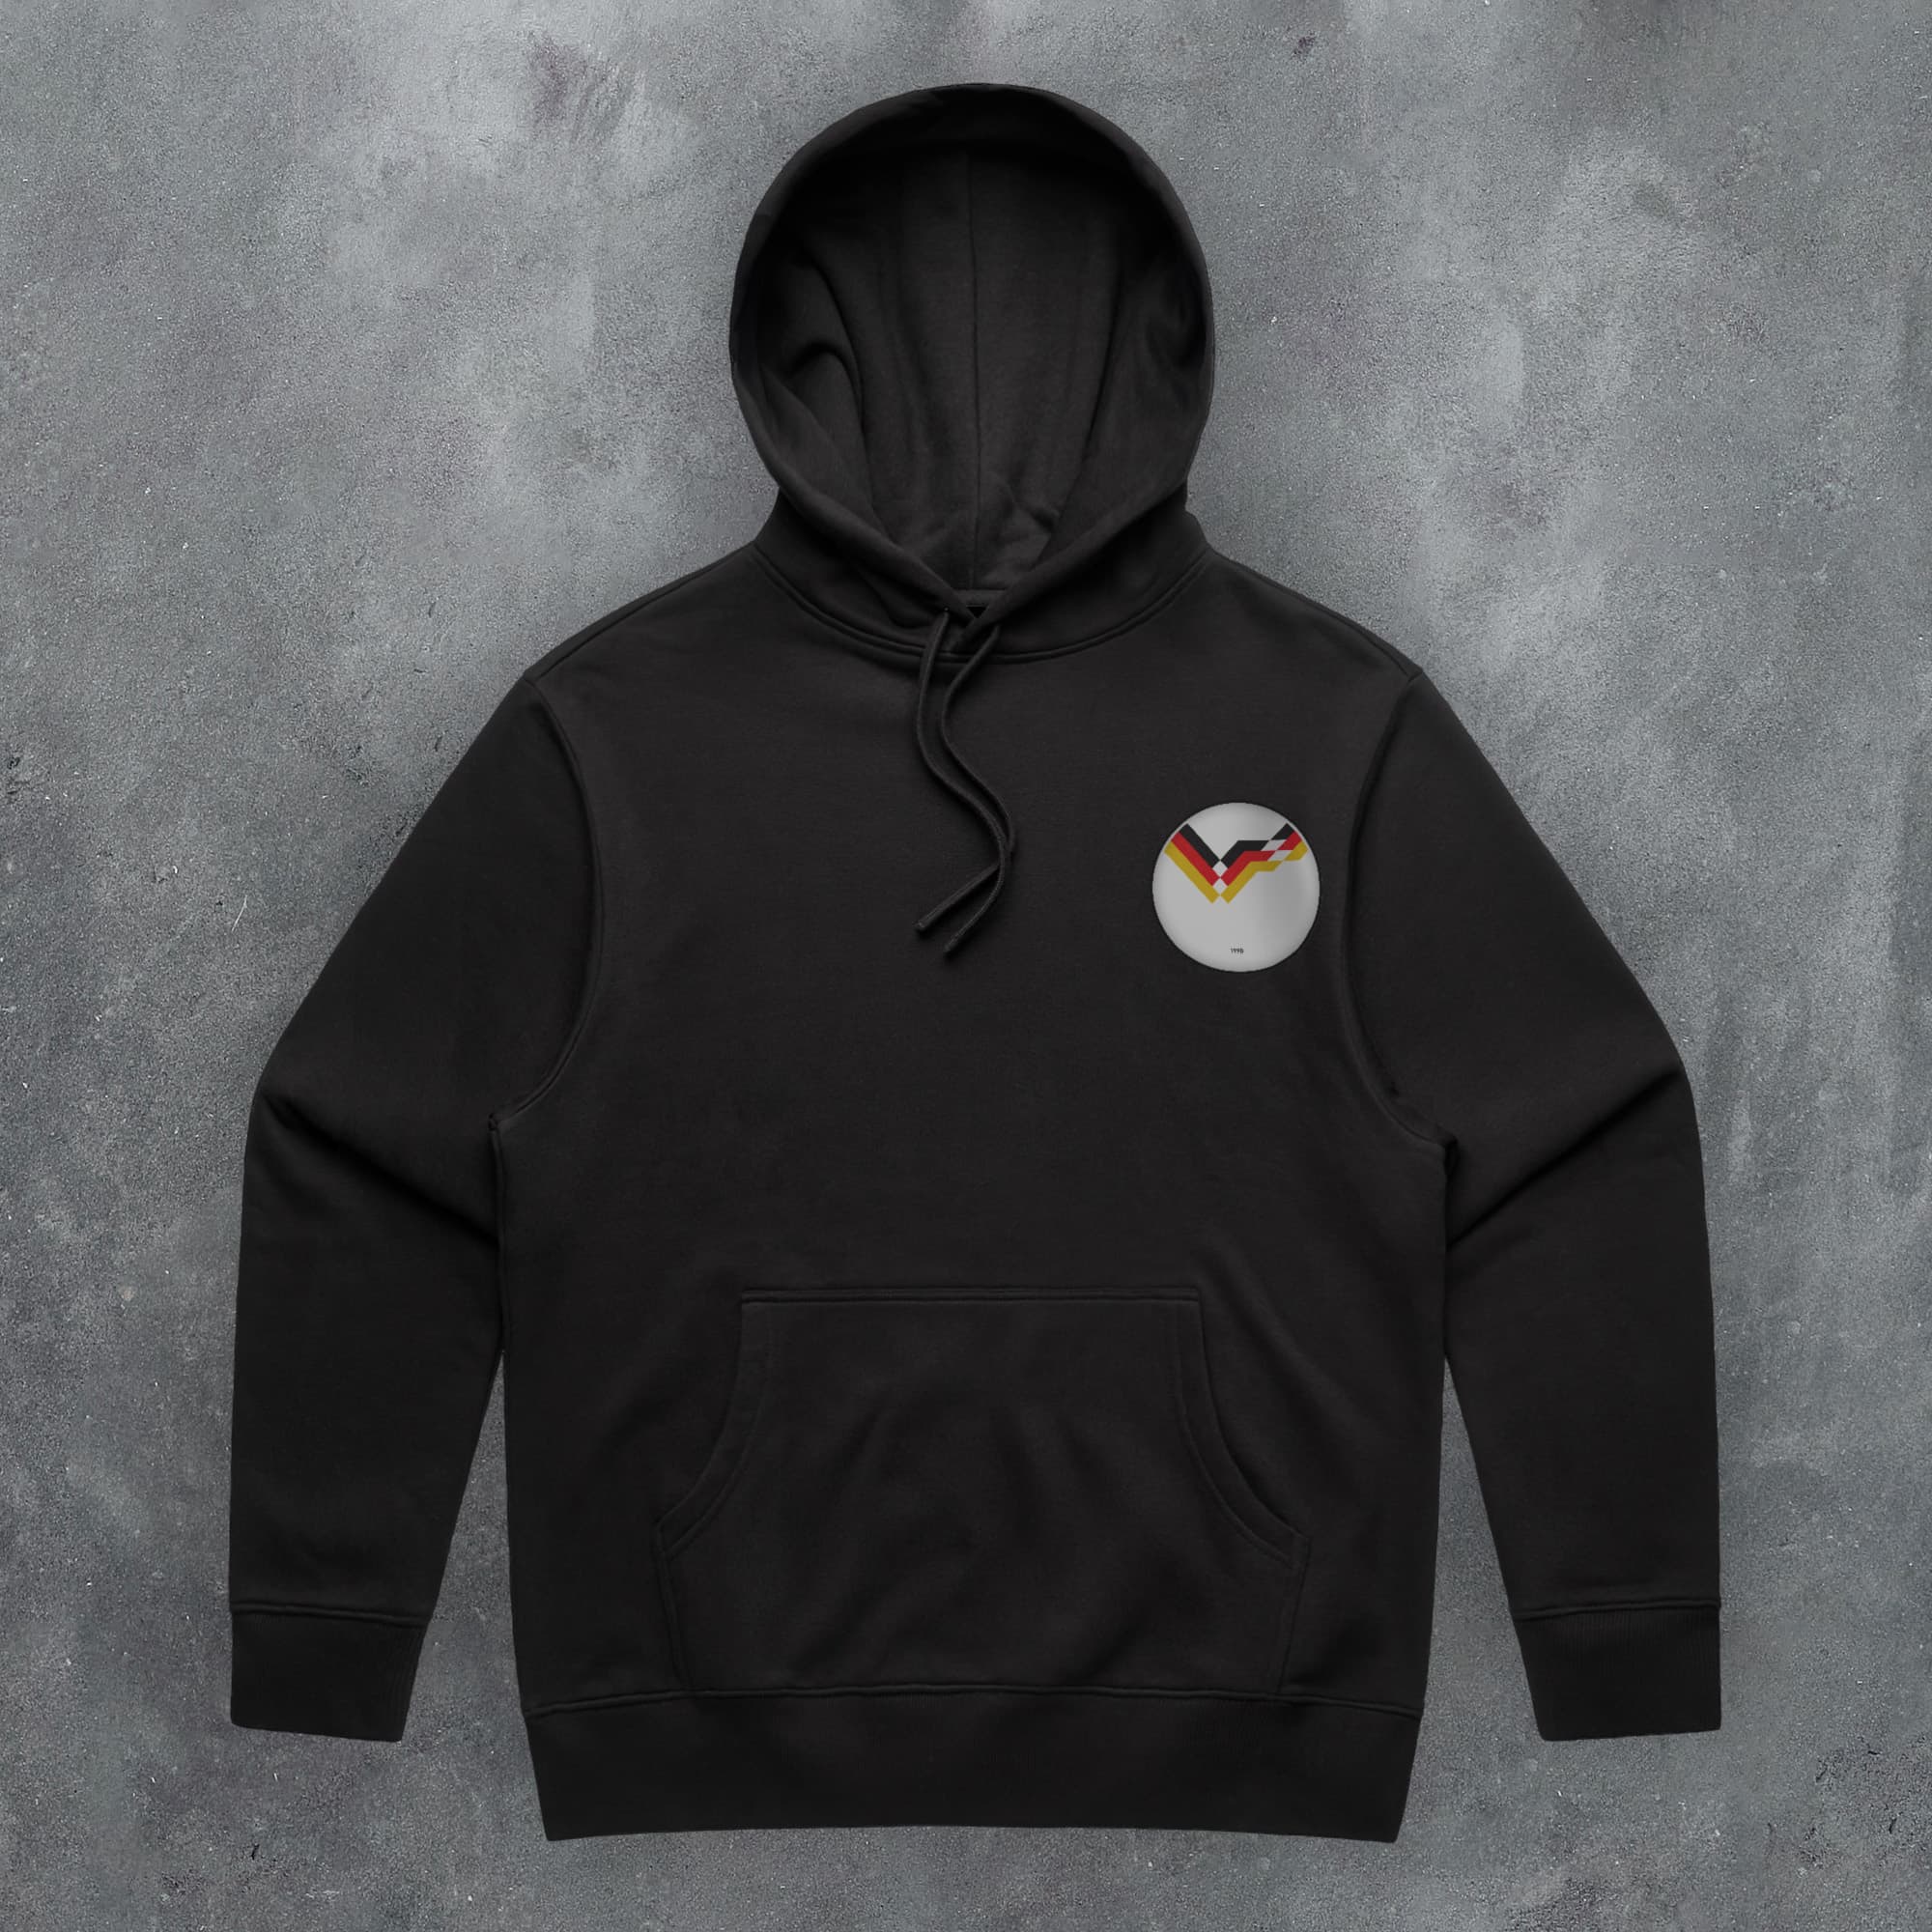 a black hoodie with a white bird on it